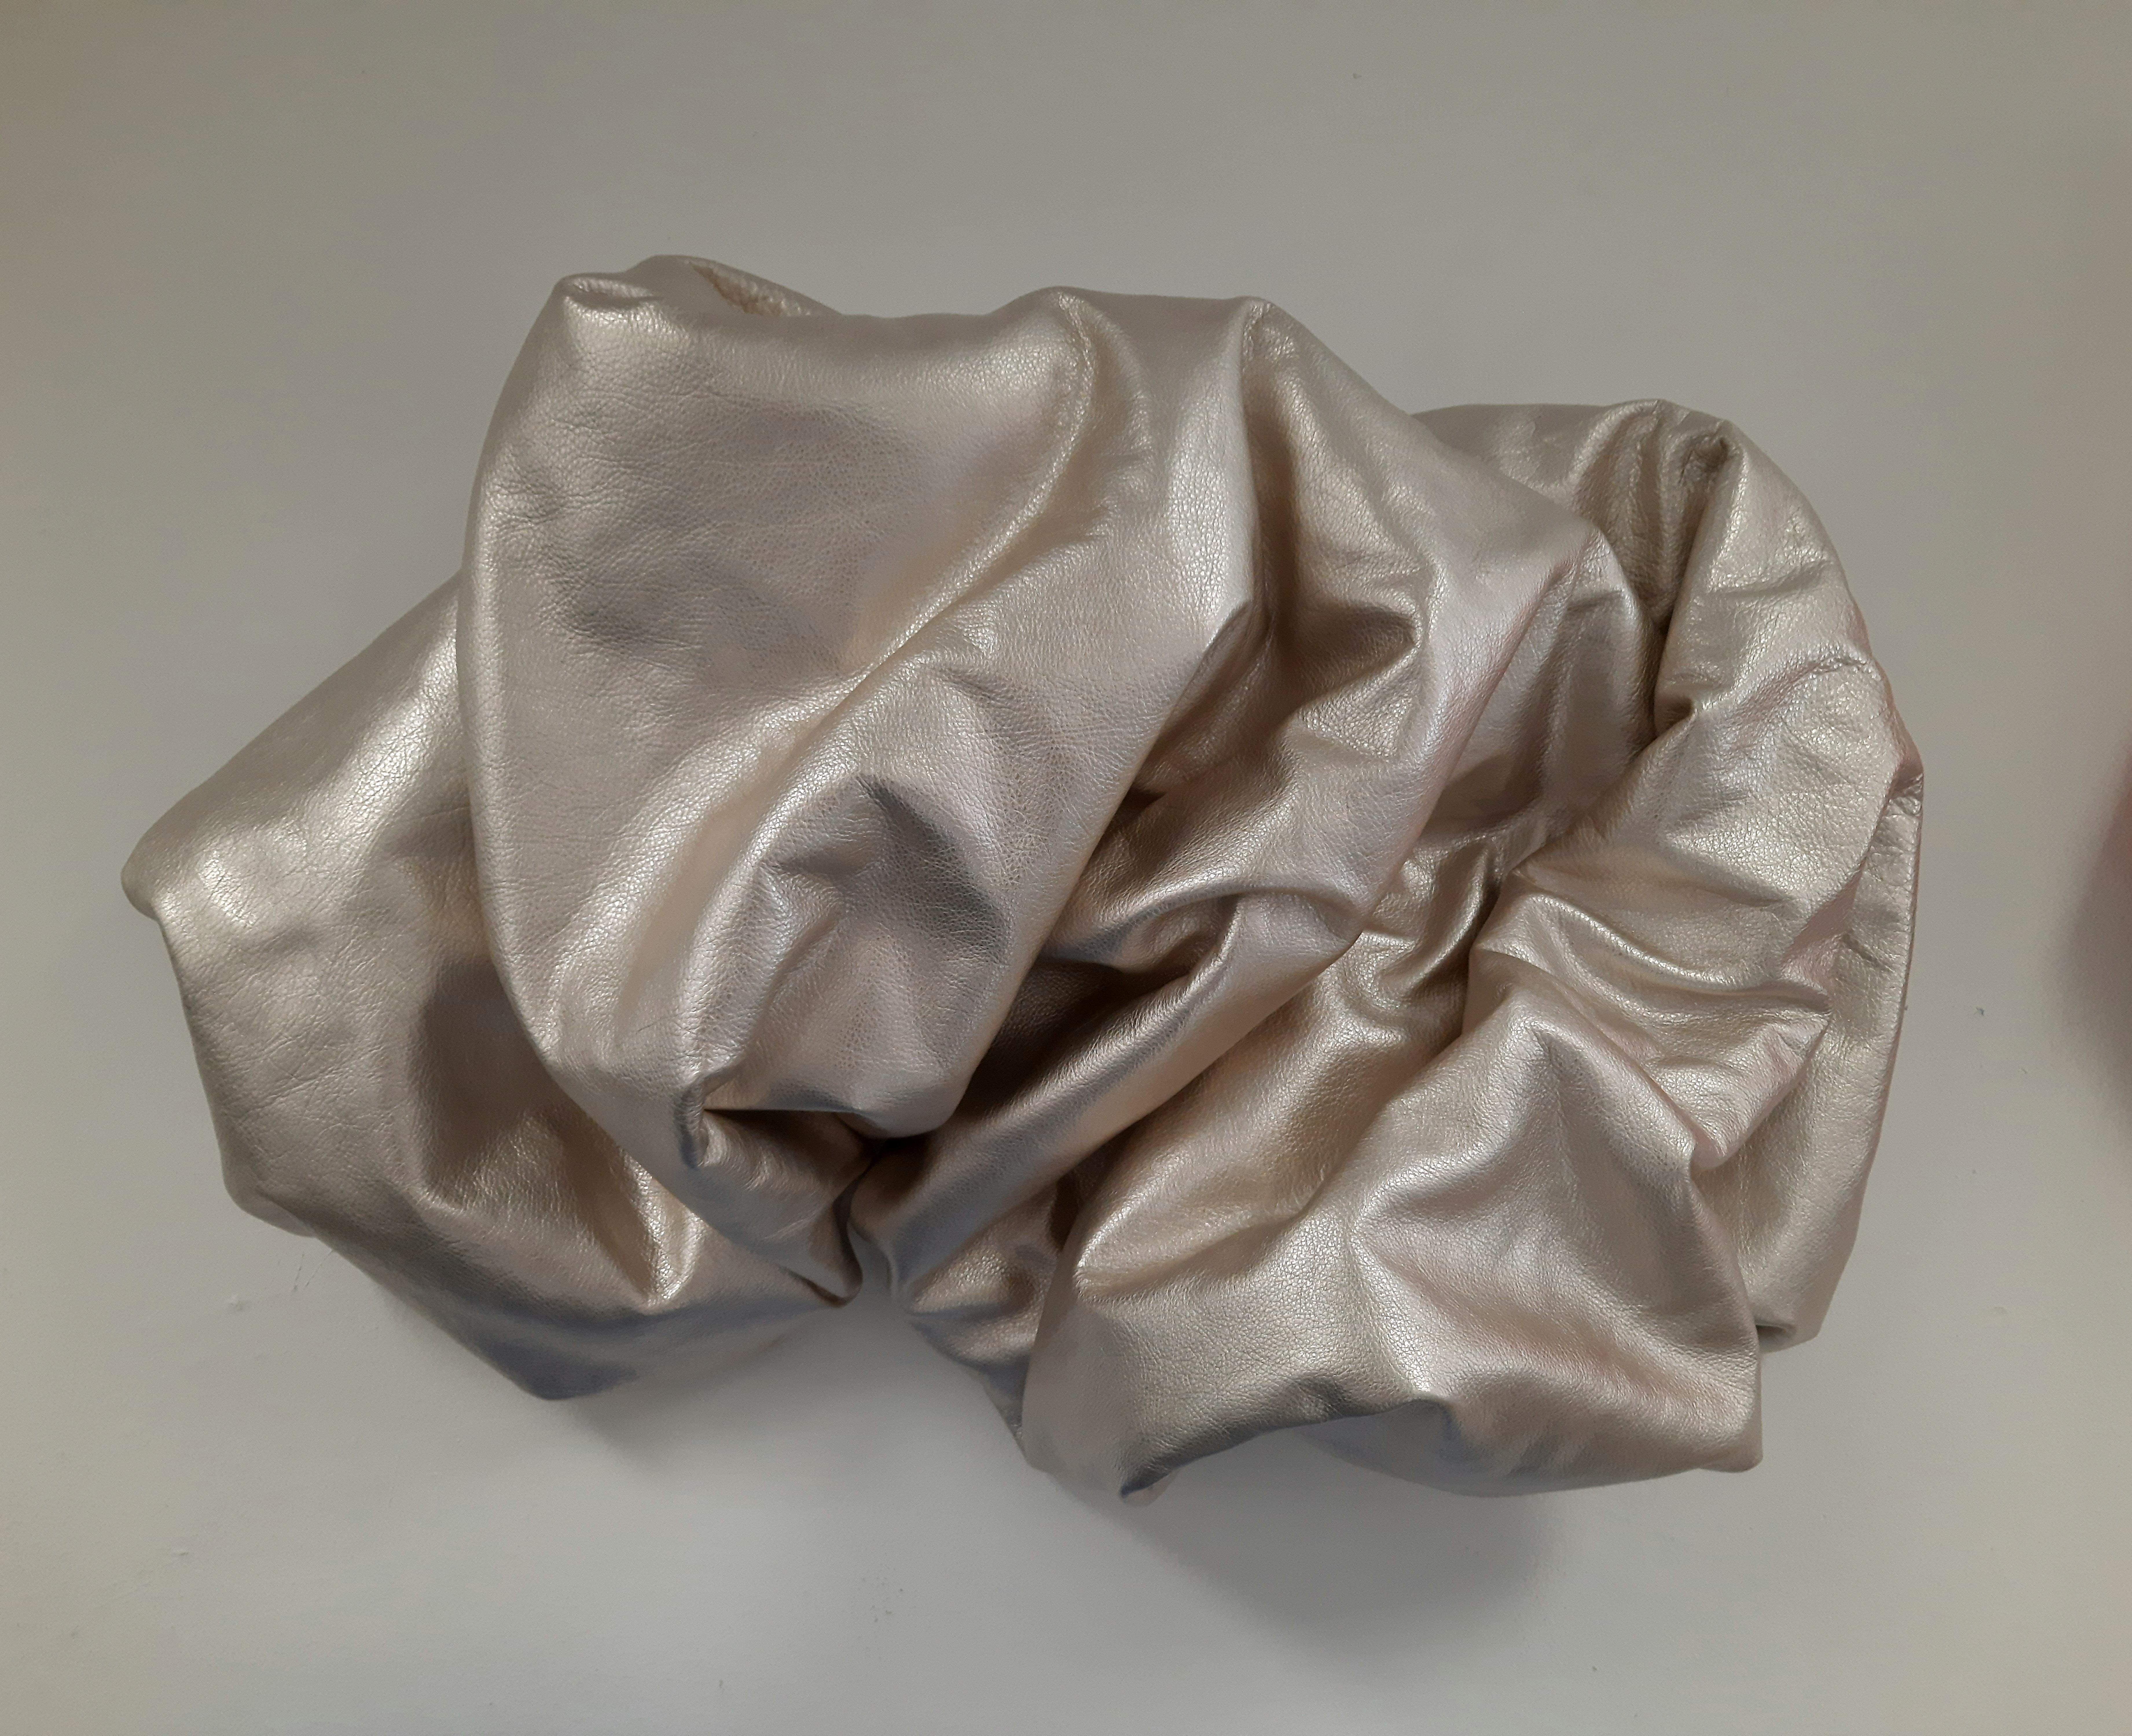 Ted VanCleave Abstract Sculpture - Drape Champagne 114 (folds pop slick metallic smooth leather wall sculpture art)